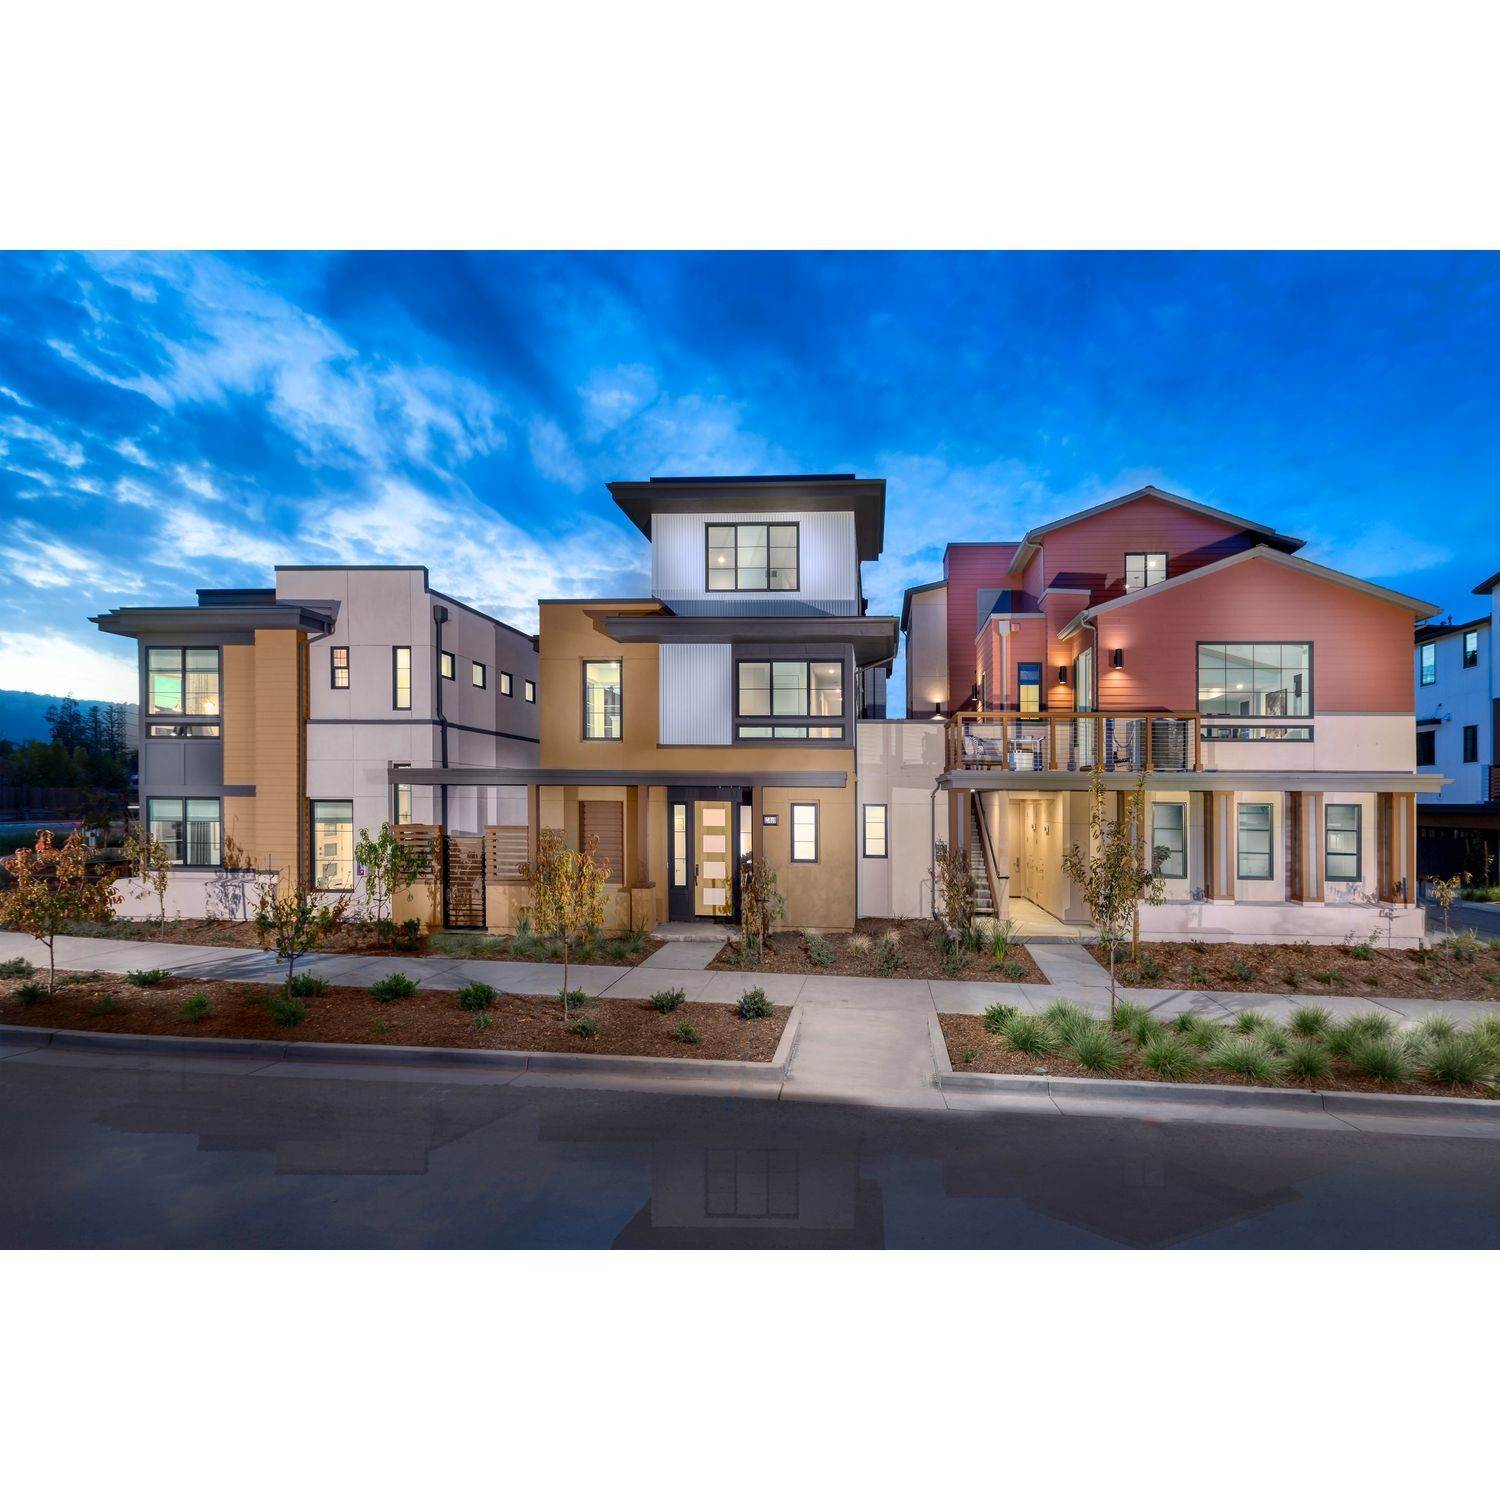 Single Family for Sale at Bellaterra - The Bungalows- Plan 1 16365 Lark Ave LOS GATOS, CALIFORNIA 95032 UNITED STATES